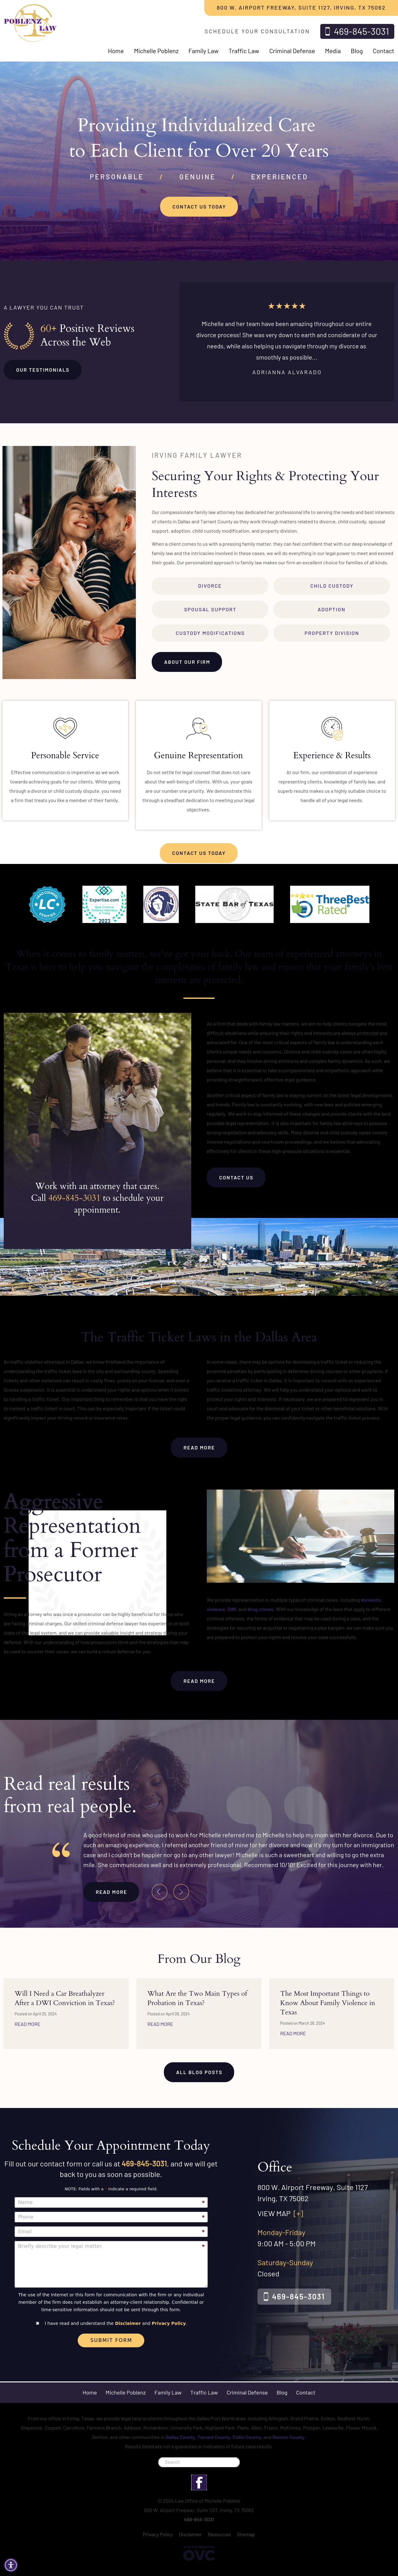 Law Office of Michelle Poblenz - Irving TX Lawyers